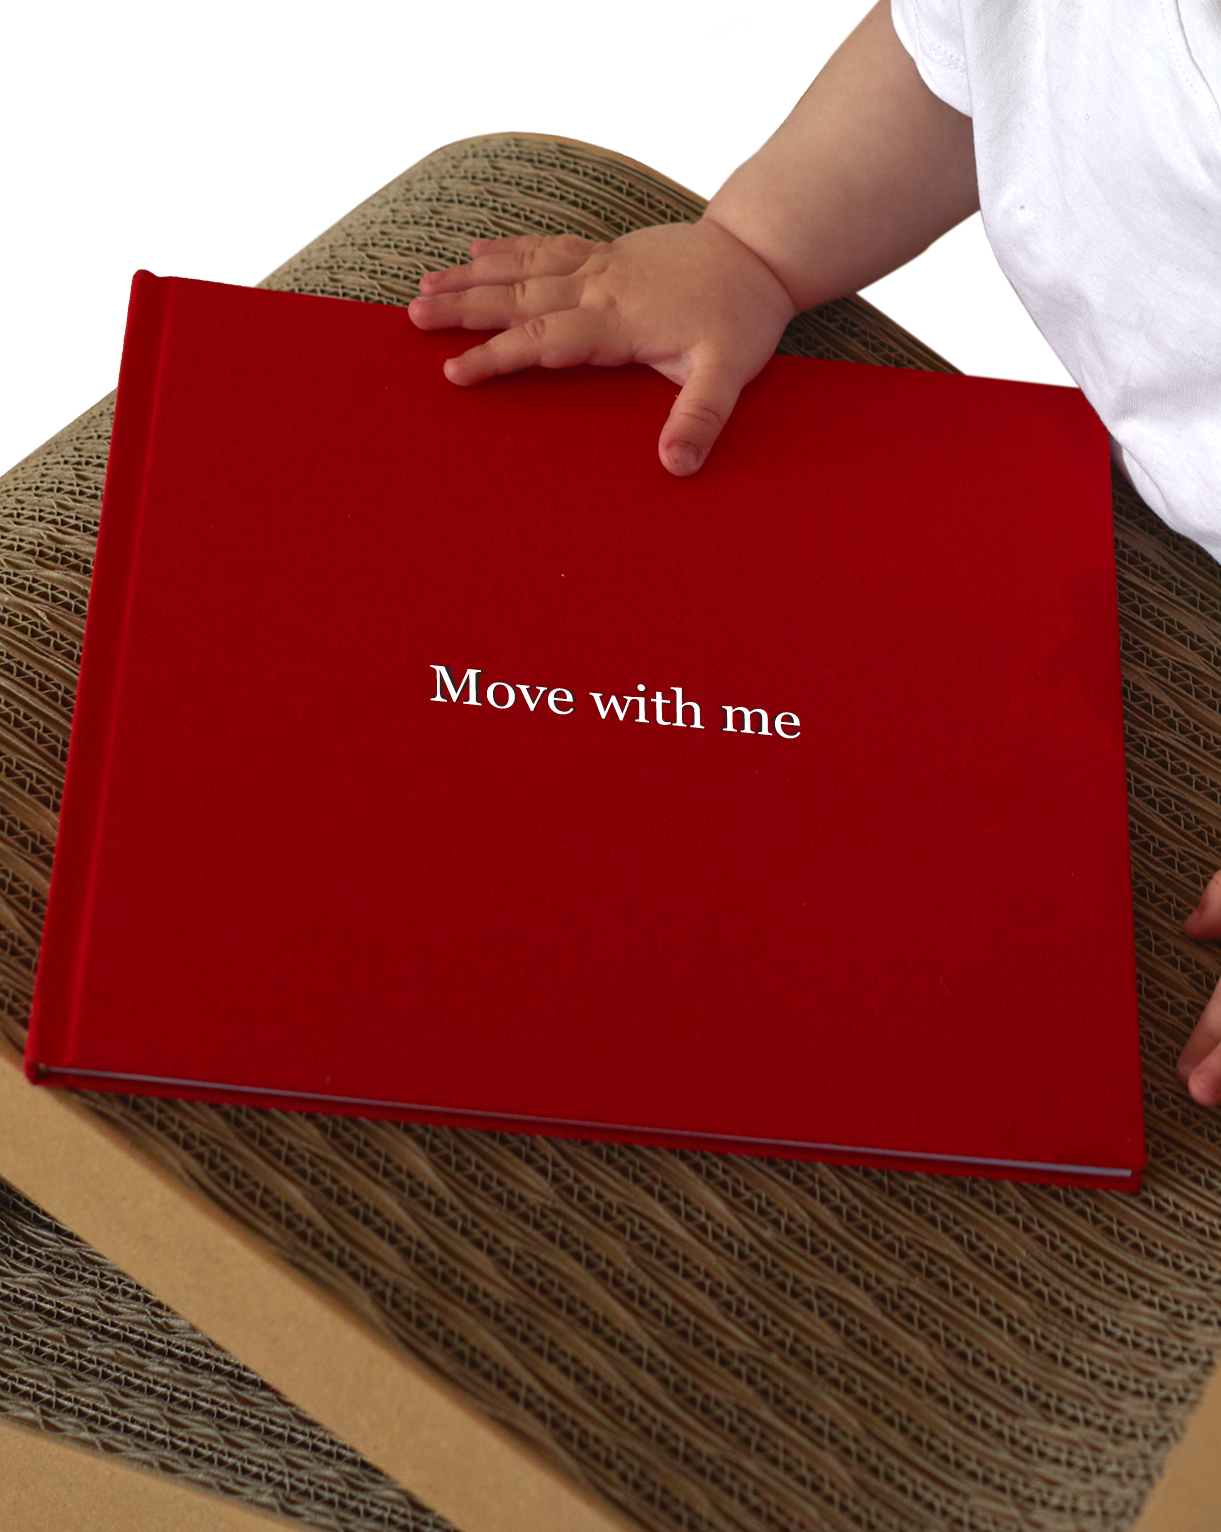 Move with me